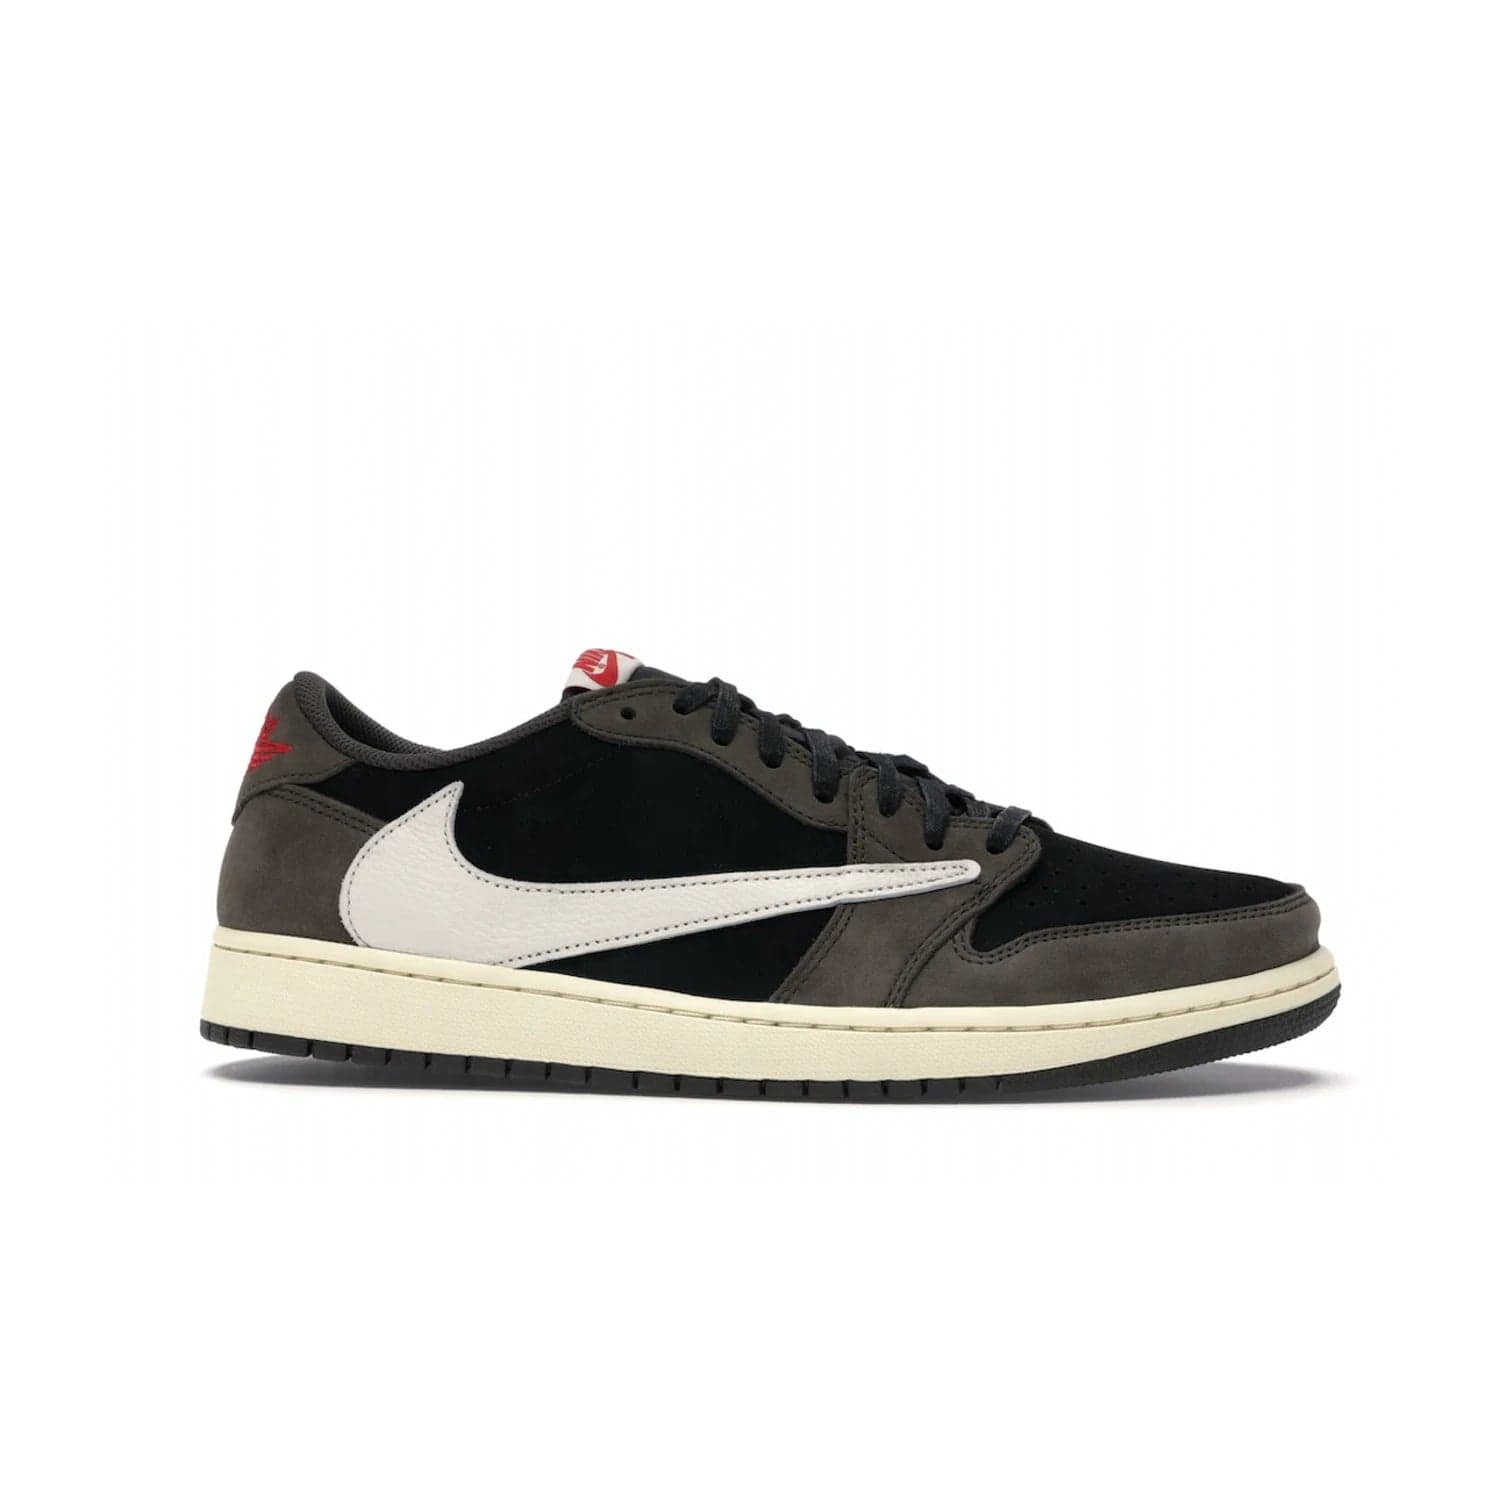 Jordan 1 Retro Low OG SP Travis Scott - Image 2 - Only at www.BallersClubKickz.com - The Air Jordan 1 Low Travis Scott combines modern and classic design elements for a stylish look. It features a black upper with dark brown overlays, red accents, sail midsole, and dark brown outsole. Signature touches include a backwards Swoosh logo and “Cactus Jack” inscriptions. Released in July 2019.